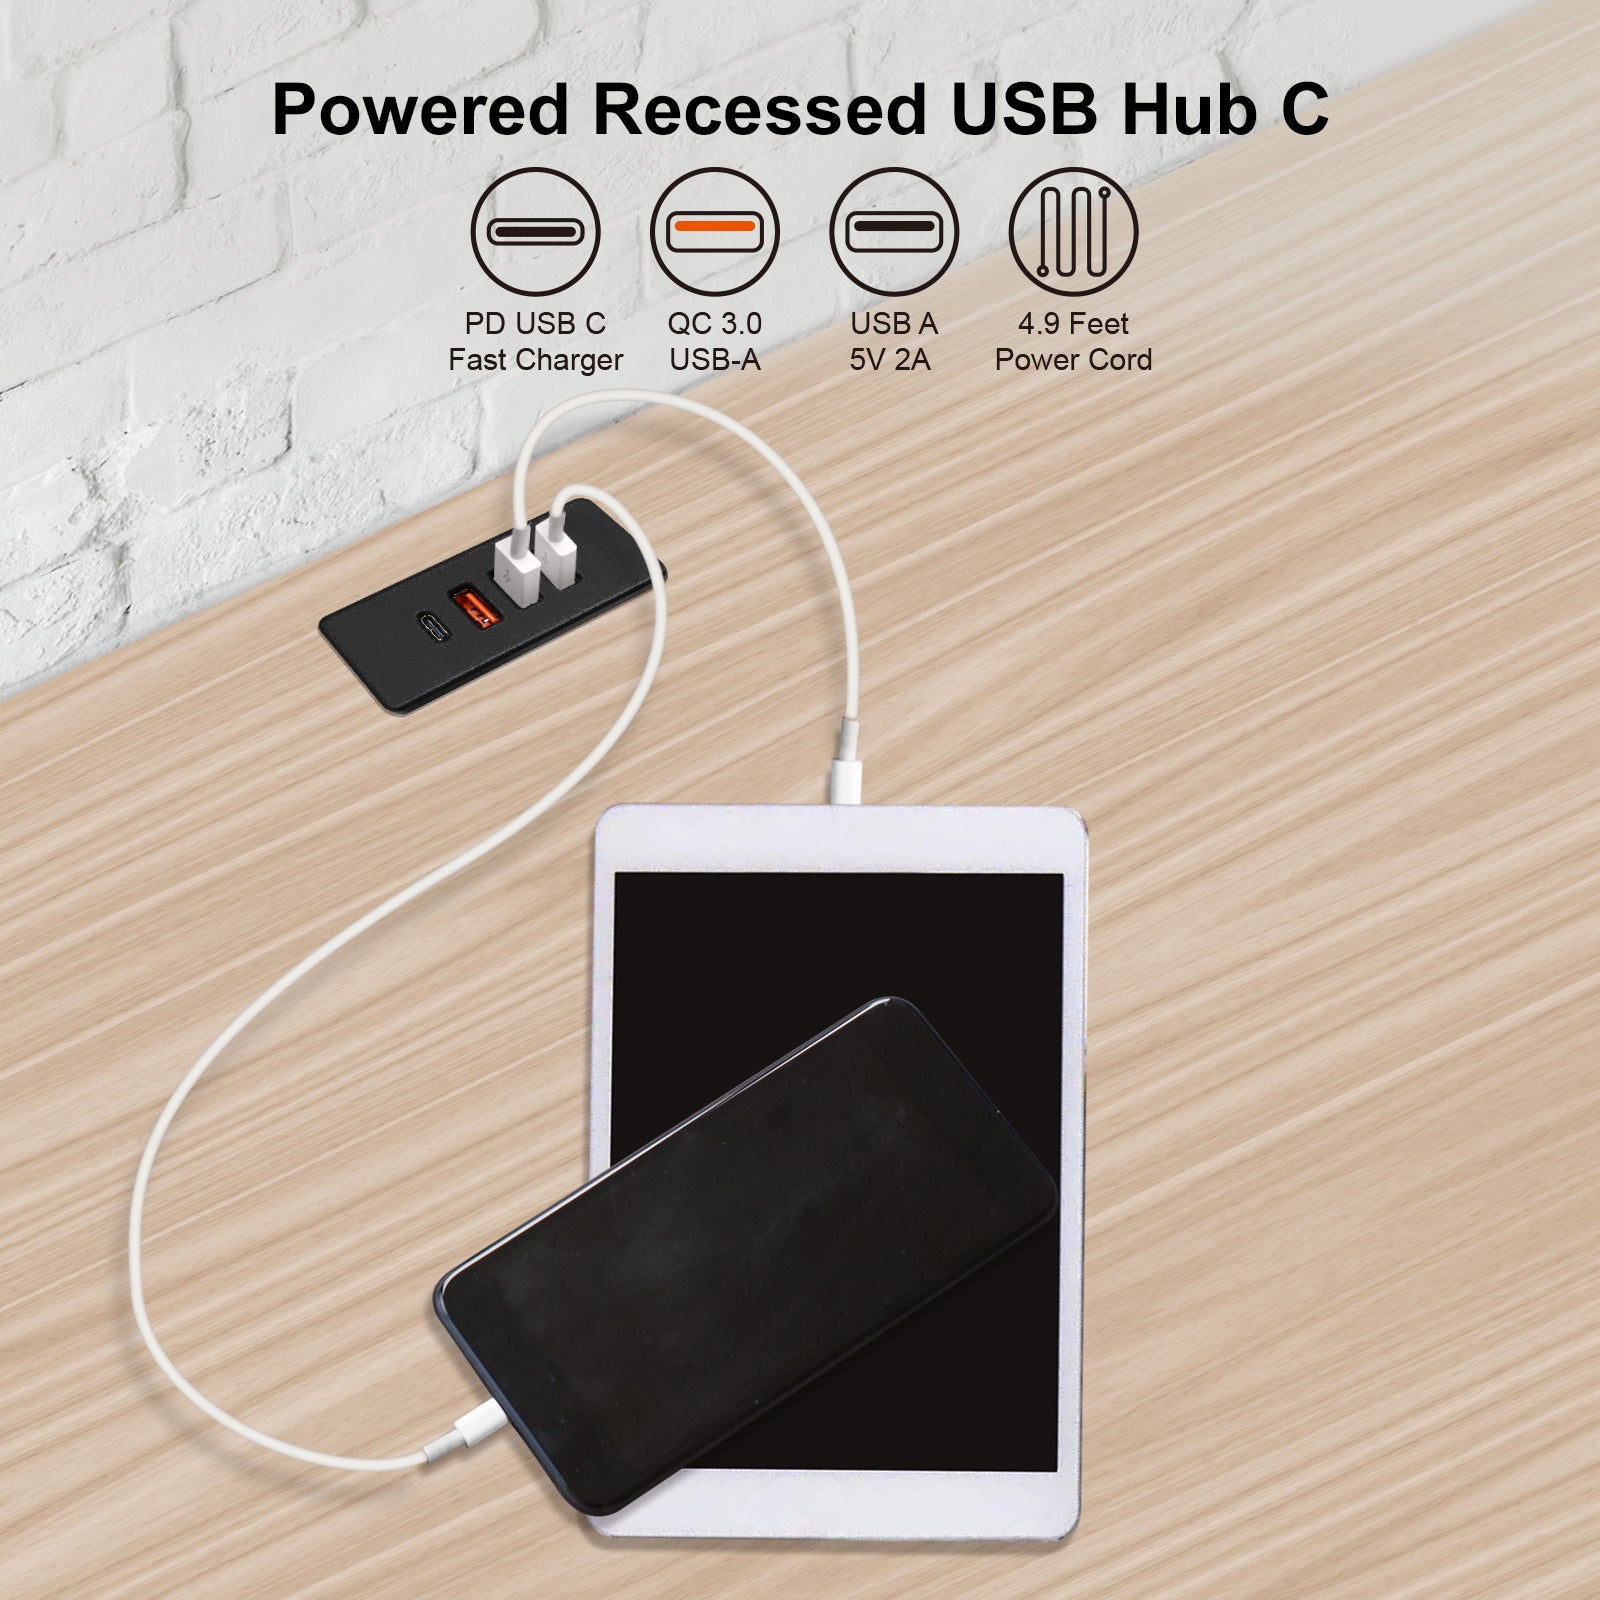 Powered USB C Hub Socket Recessed USB C Power Strip Outlet with Fast Charge 4 USB Ports 20W Mounted into Bed Desk Table Sofa